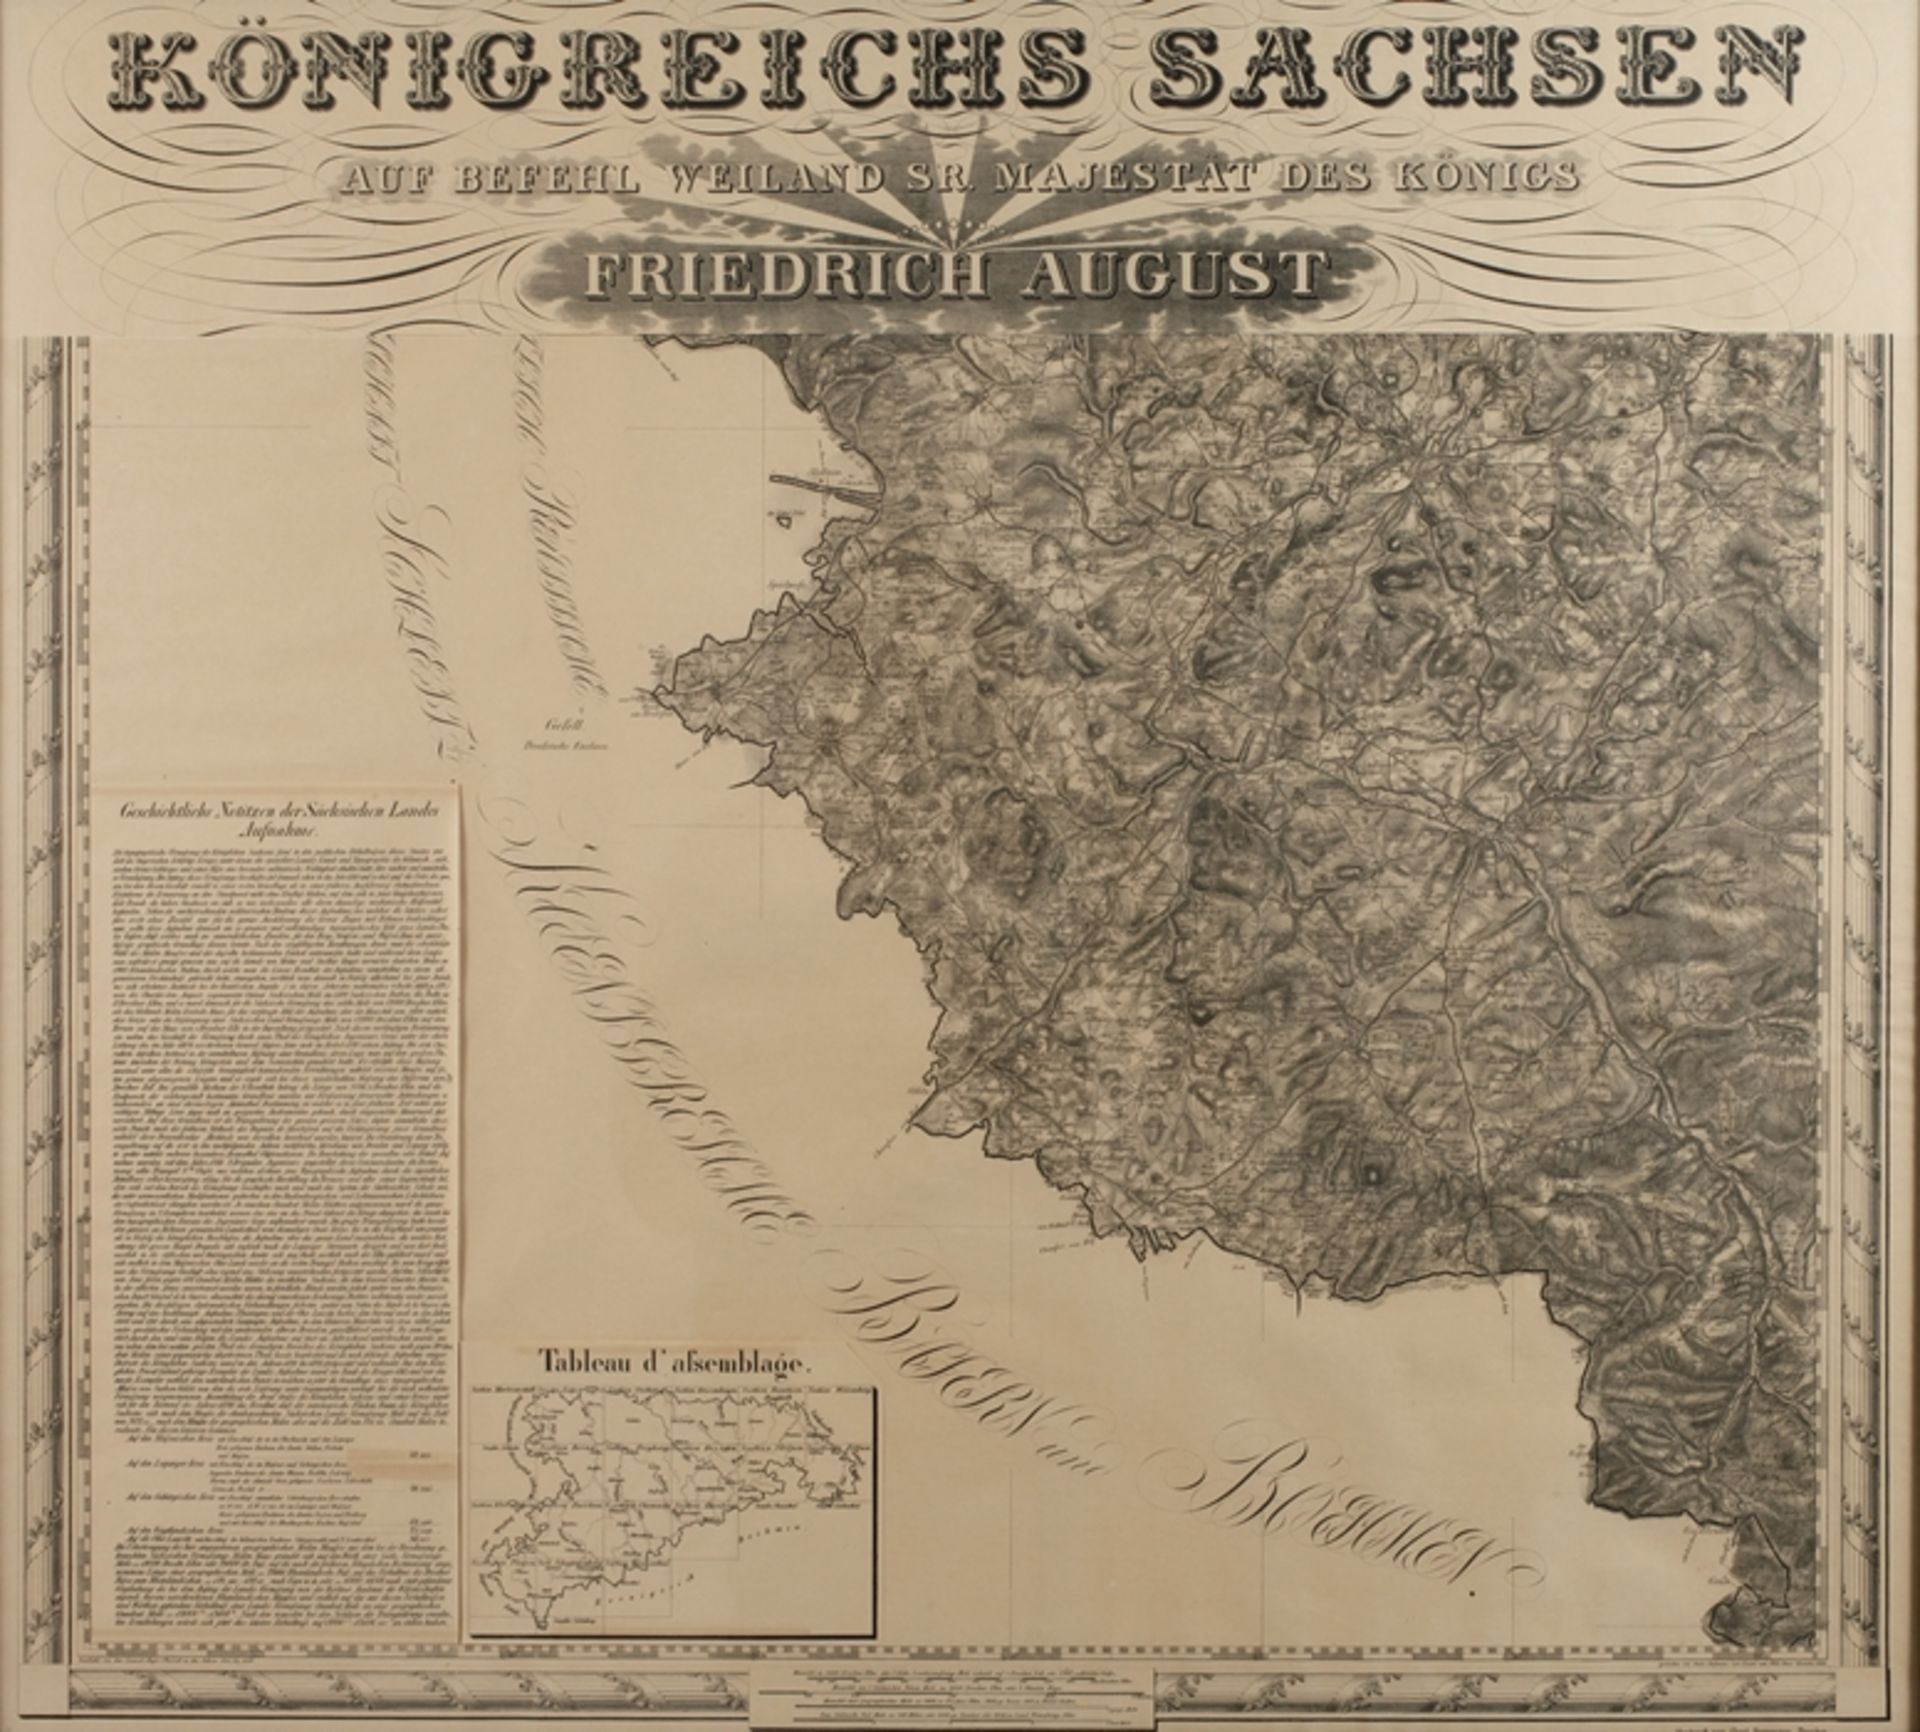 Partial map of the Kingdom of Saxony